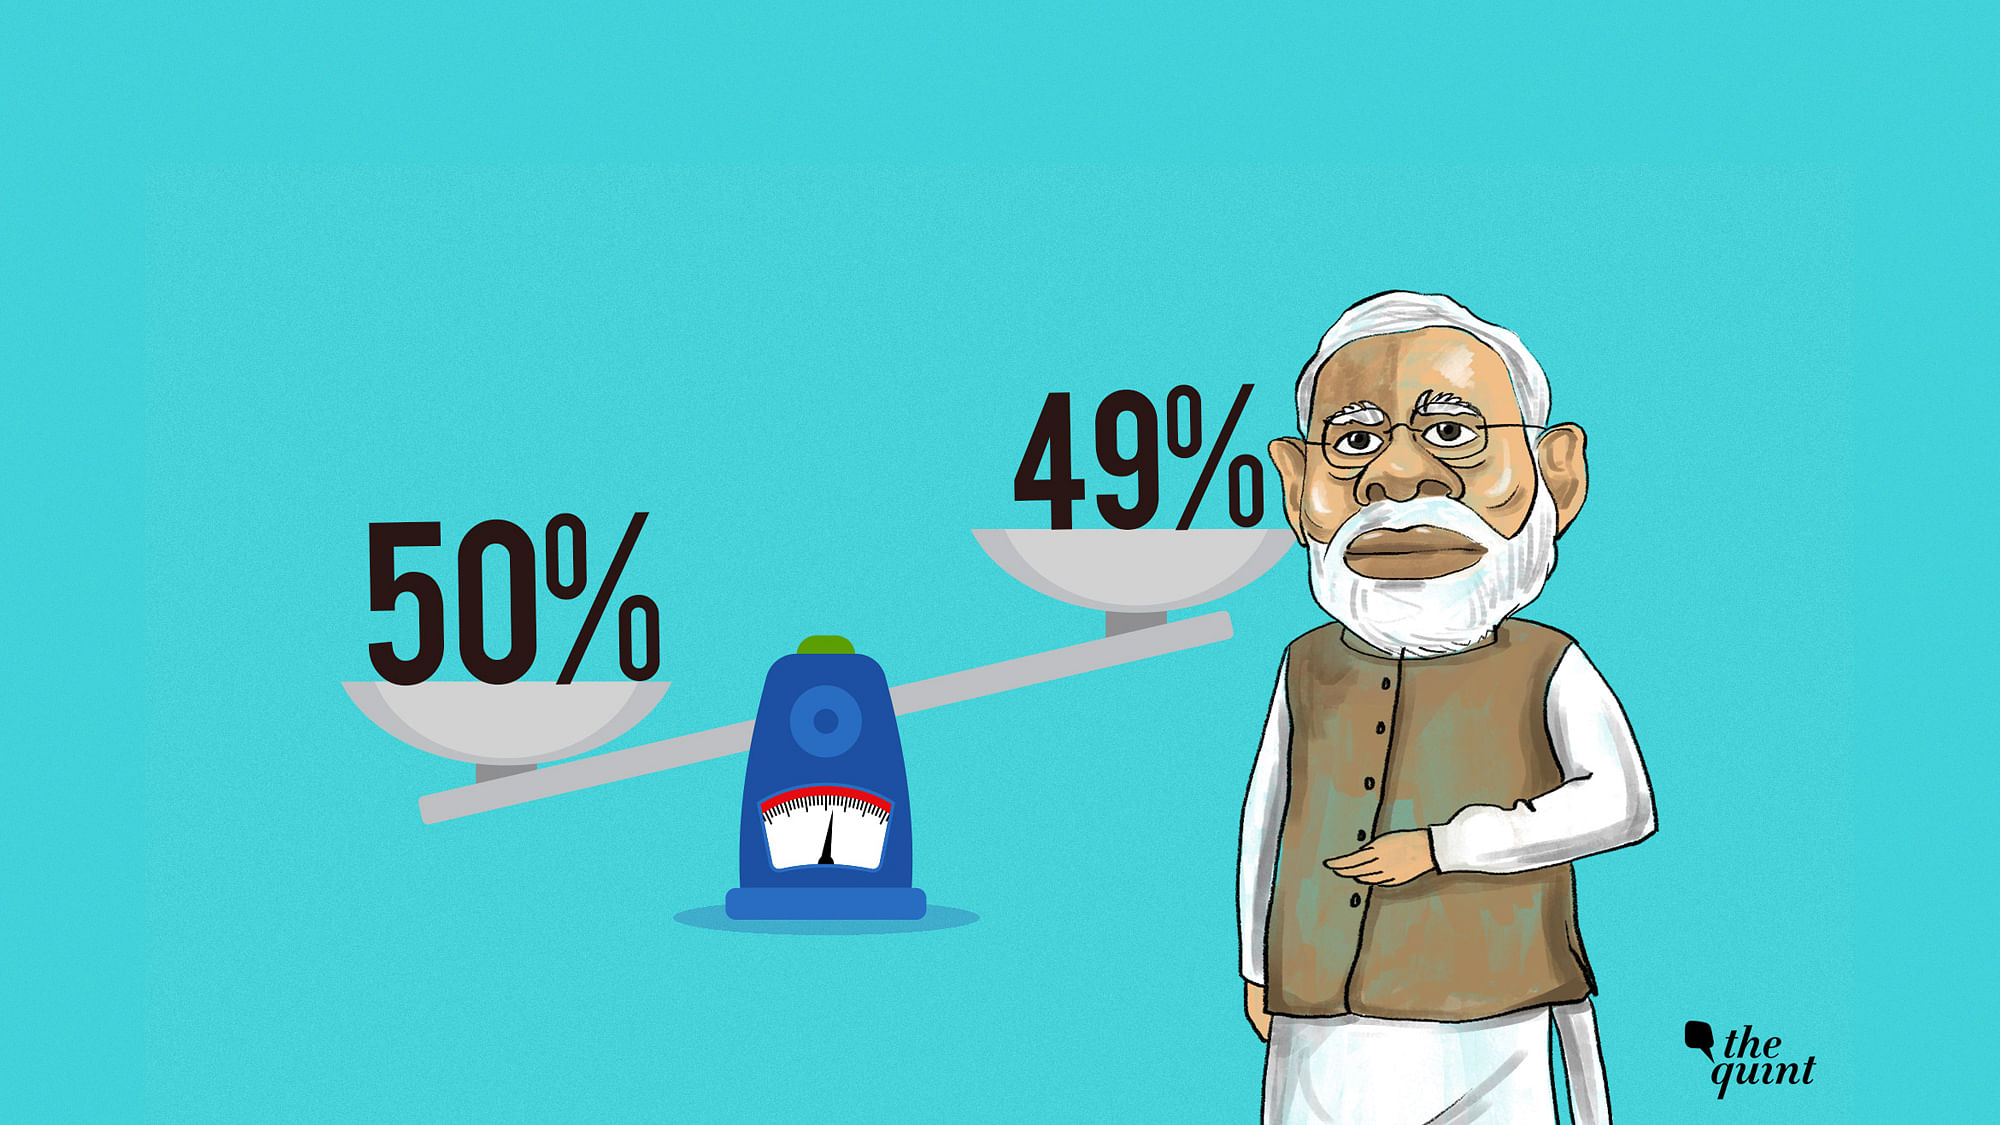 Modi’s popularity dropped four percentage points from 53% in January 2018 to to 49% in July 2018.&nbsp;